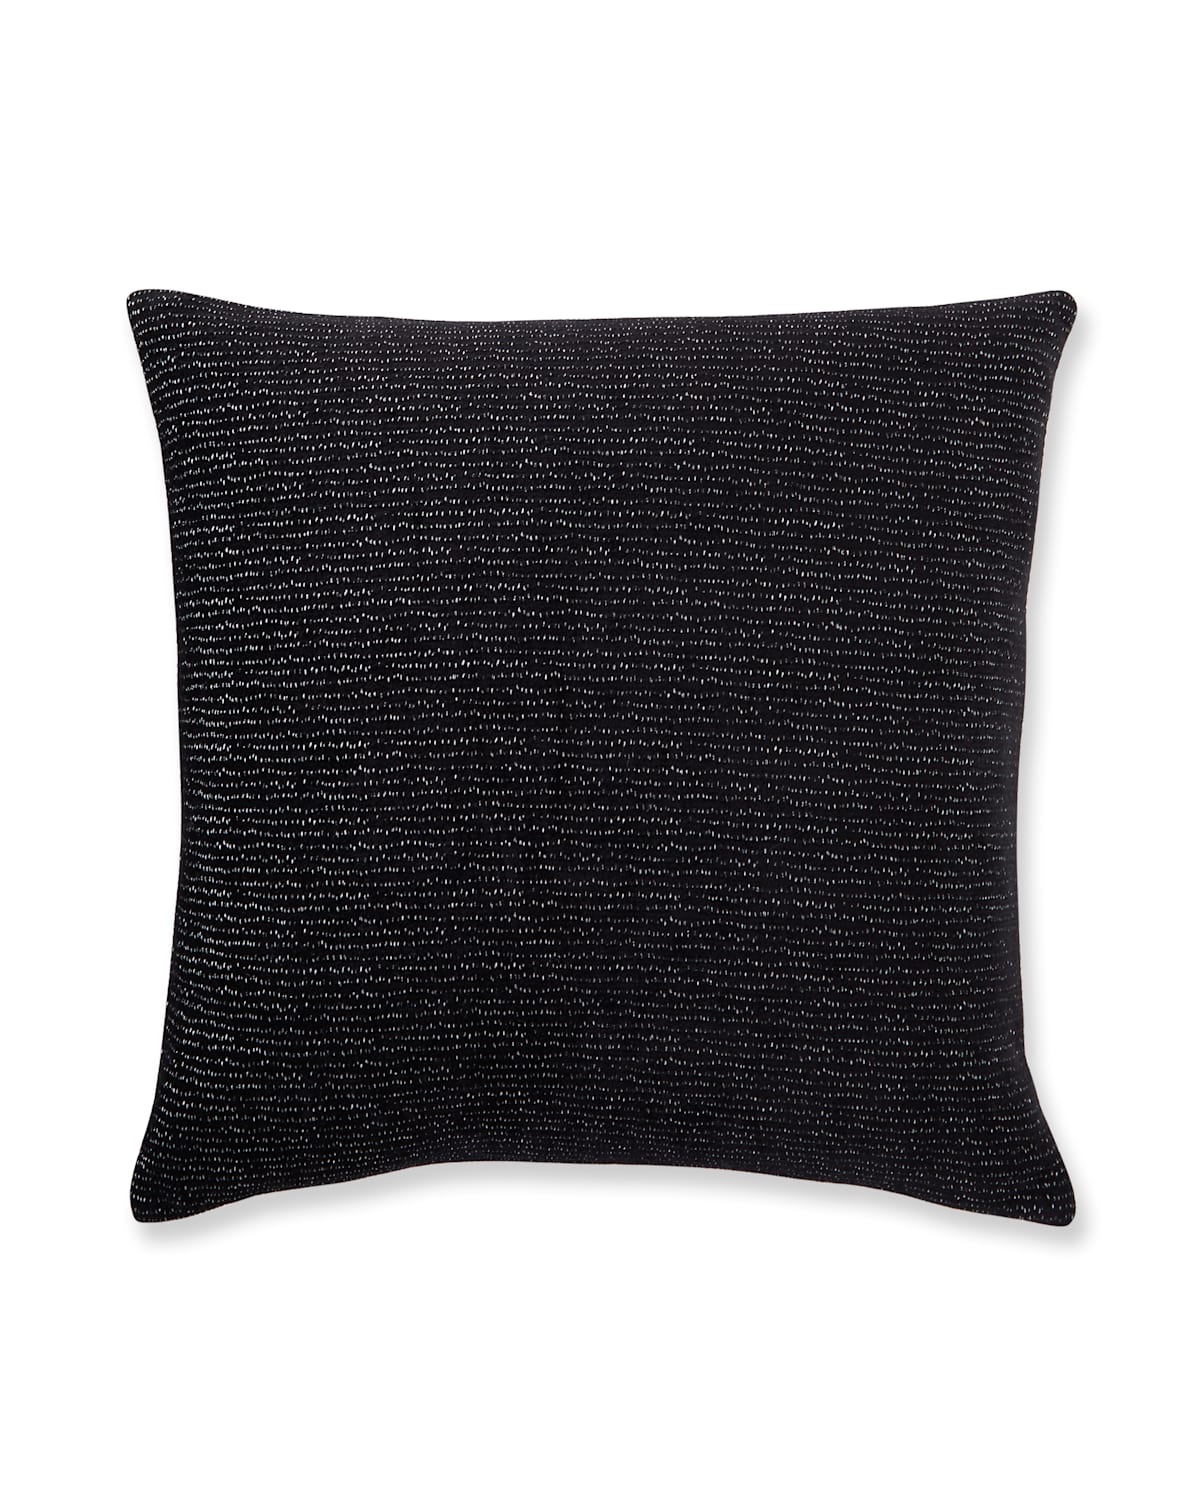 Shop Eastern Accents Stiletto Decorative Pillow, Obsidian In Black